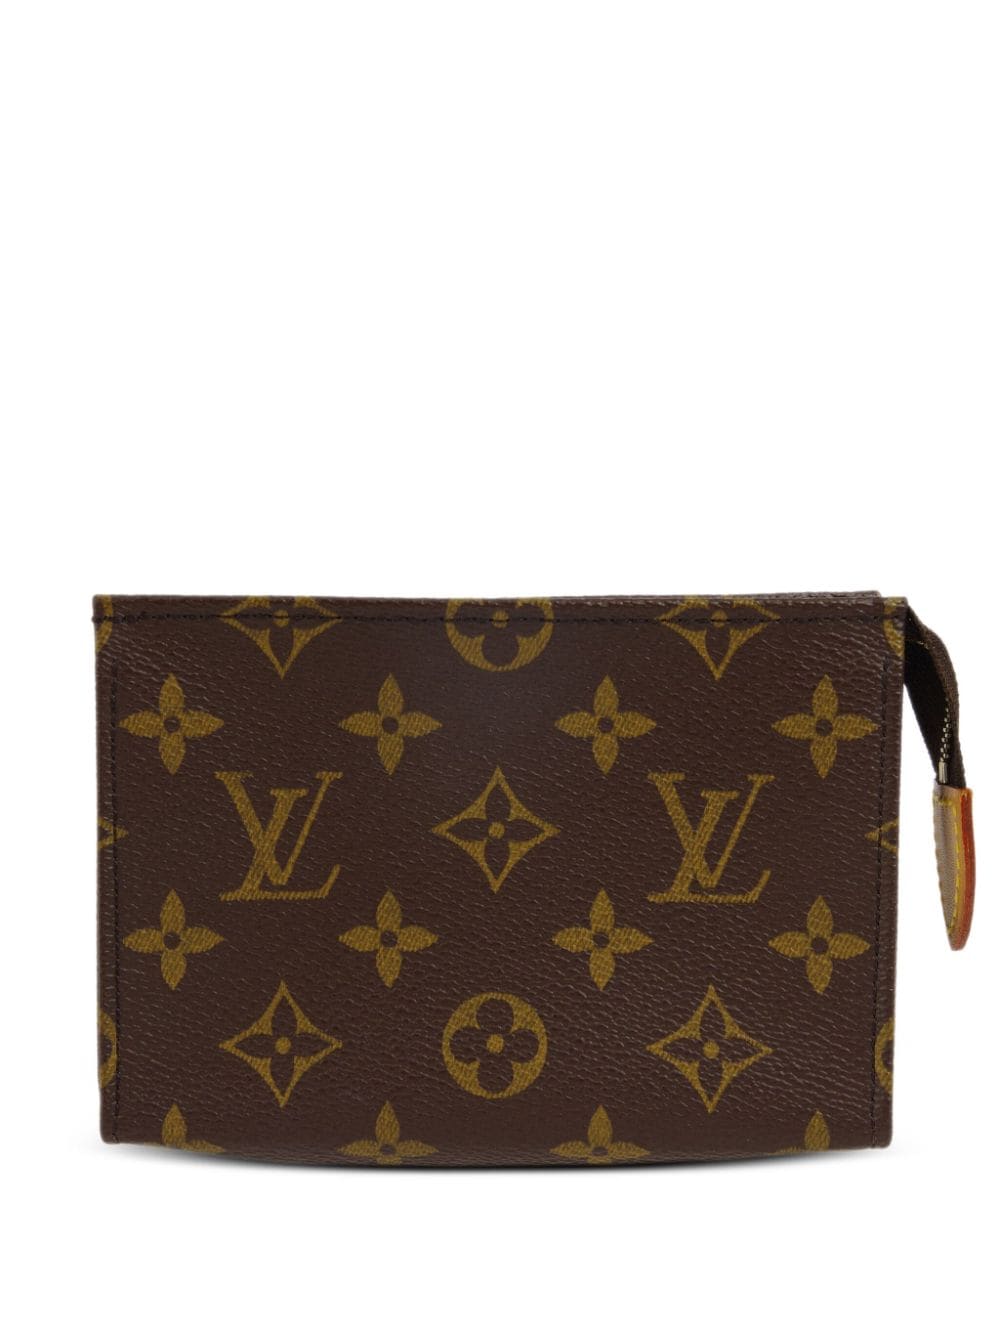 Image 1 of Louis Vuitton Pre-Owned 2004 Poche Toilette 15 cosmetic pouch